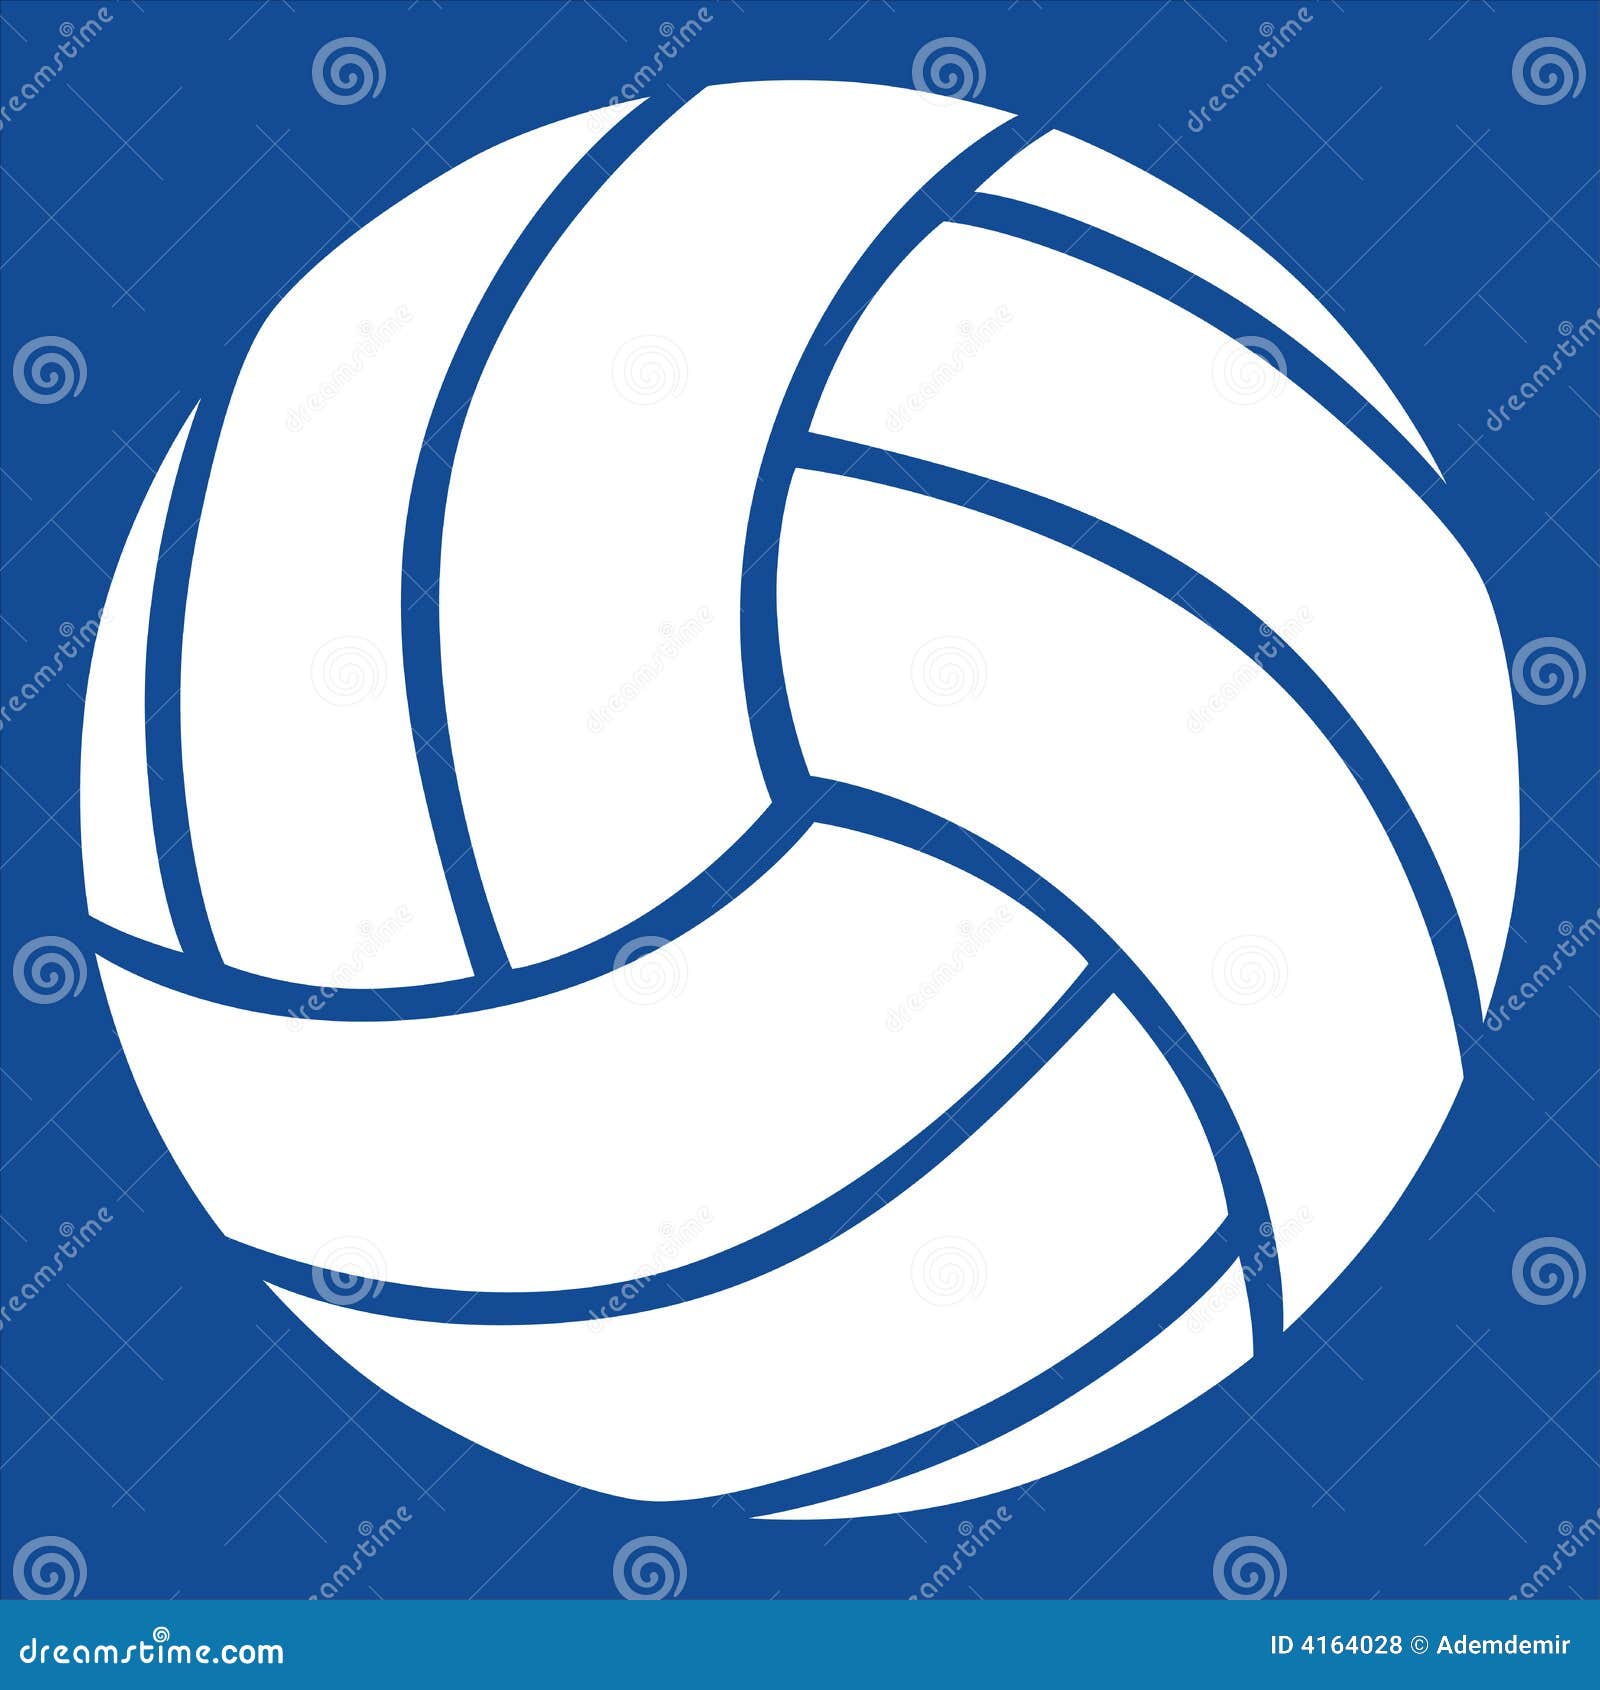 free volleyball clipart vector - photo #30